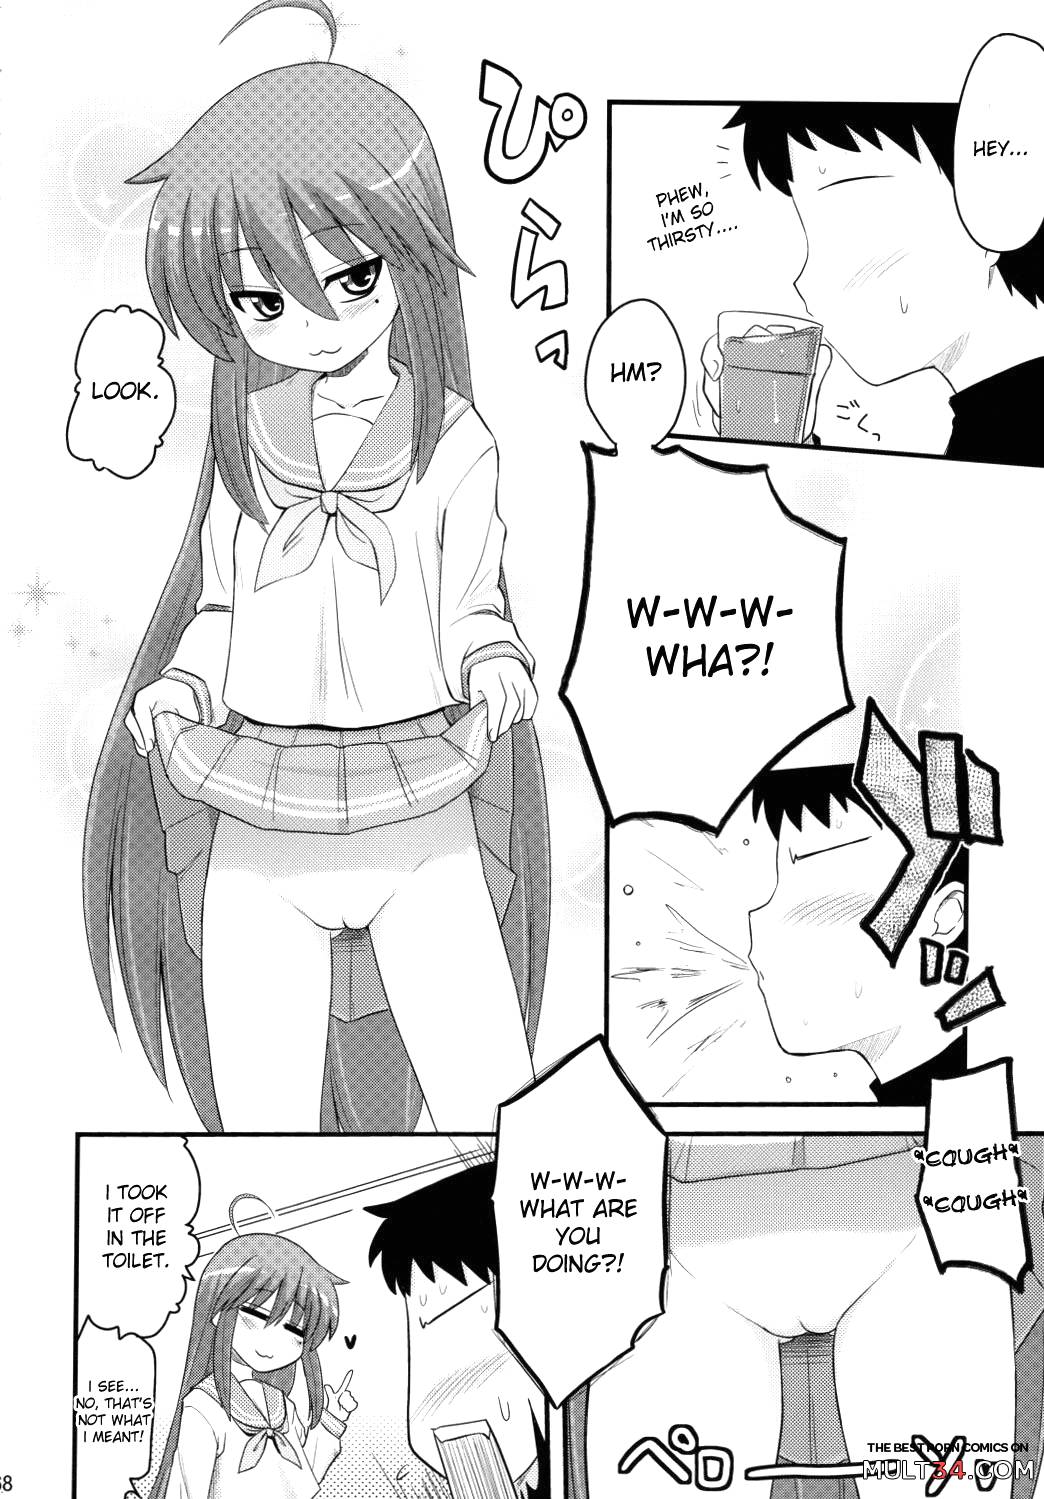 Konata and Oh-zu 4 people each and every one + 1 page 64